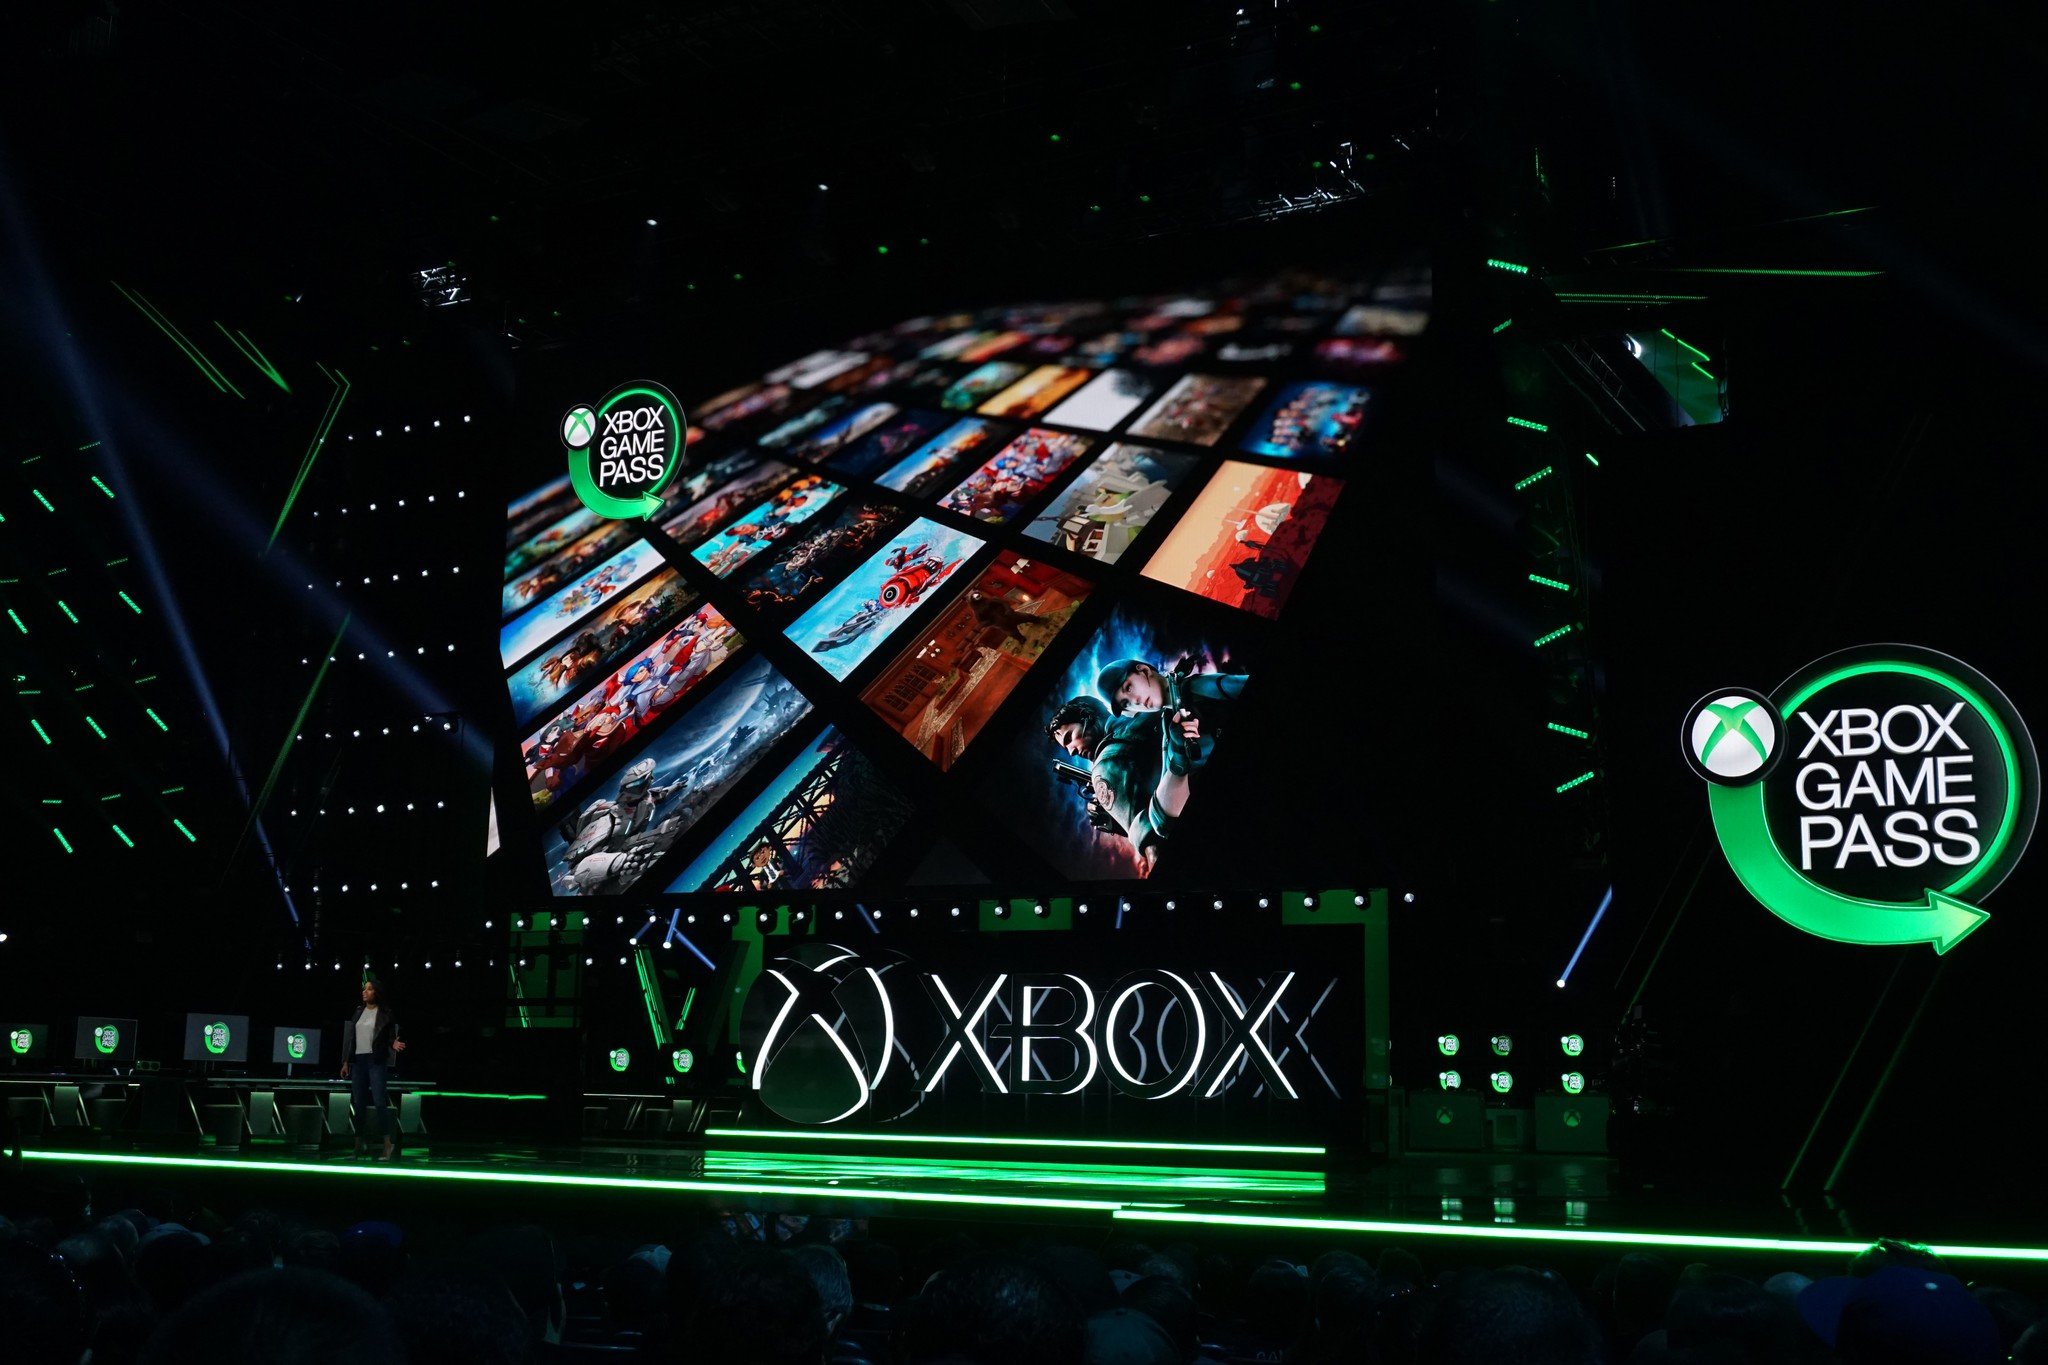 Xbox Game Pass Will Receive a Ton of Activision Blizzard Games